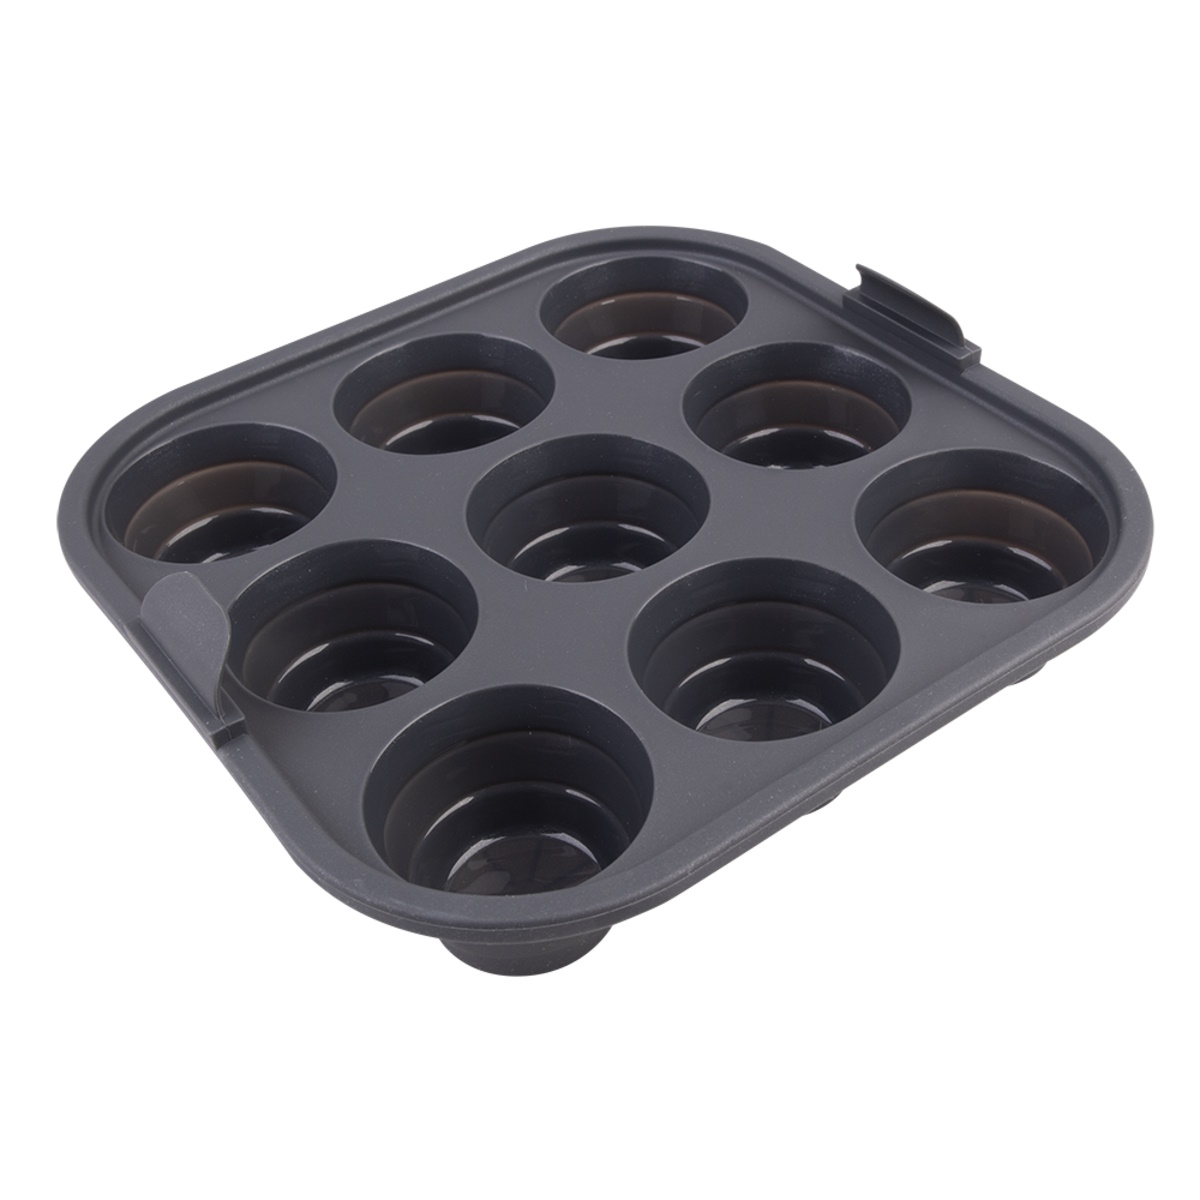 Daily Bake Silicone Square Collapsible Air Fryer 9 Cup Muffin Pan 22 X 22cm - Charcoal